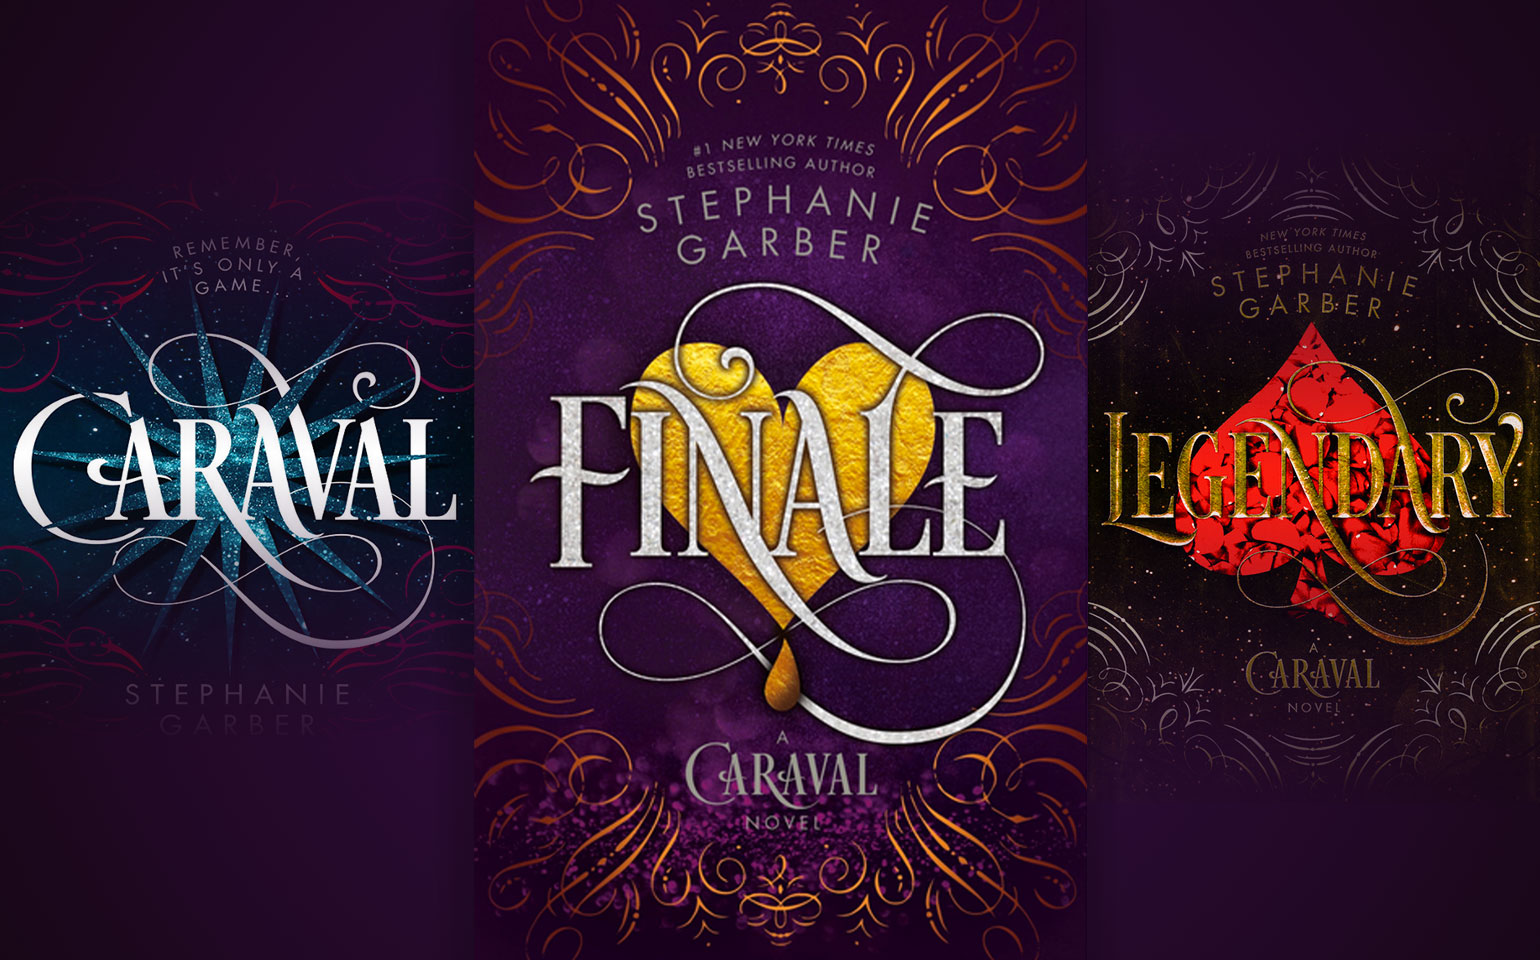 Three of the books that make up the Caraval universe are shown, titled Caraval, Legendary and Finale.